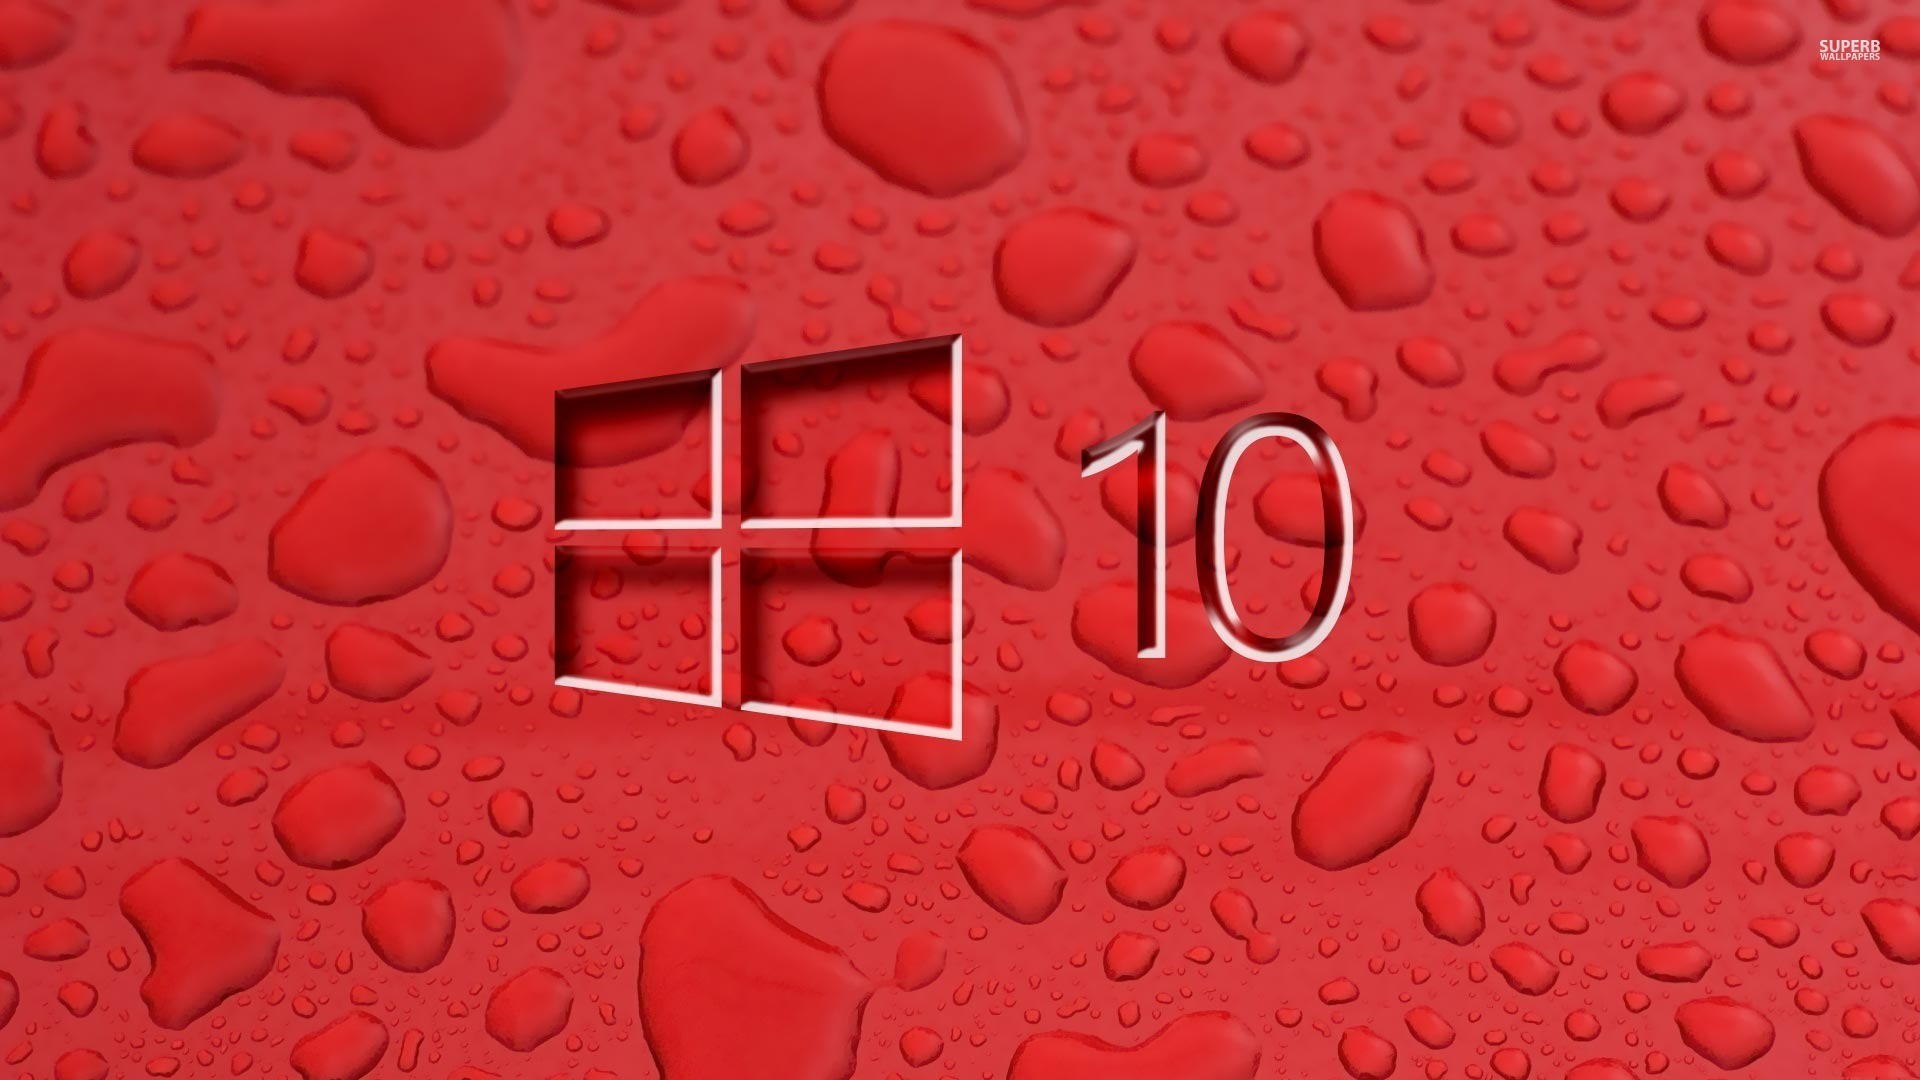 17+ Windows 10 wallpapers HD ·① Download free amazing ...